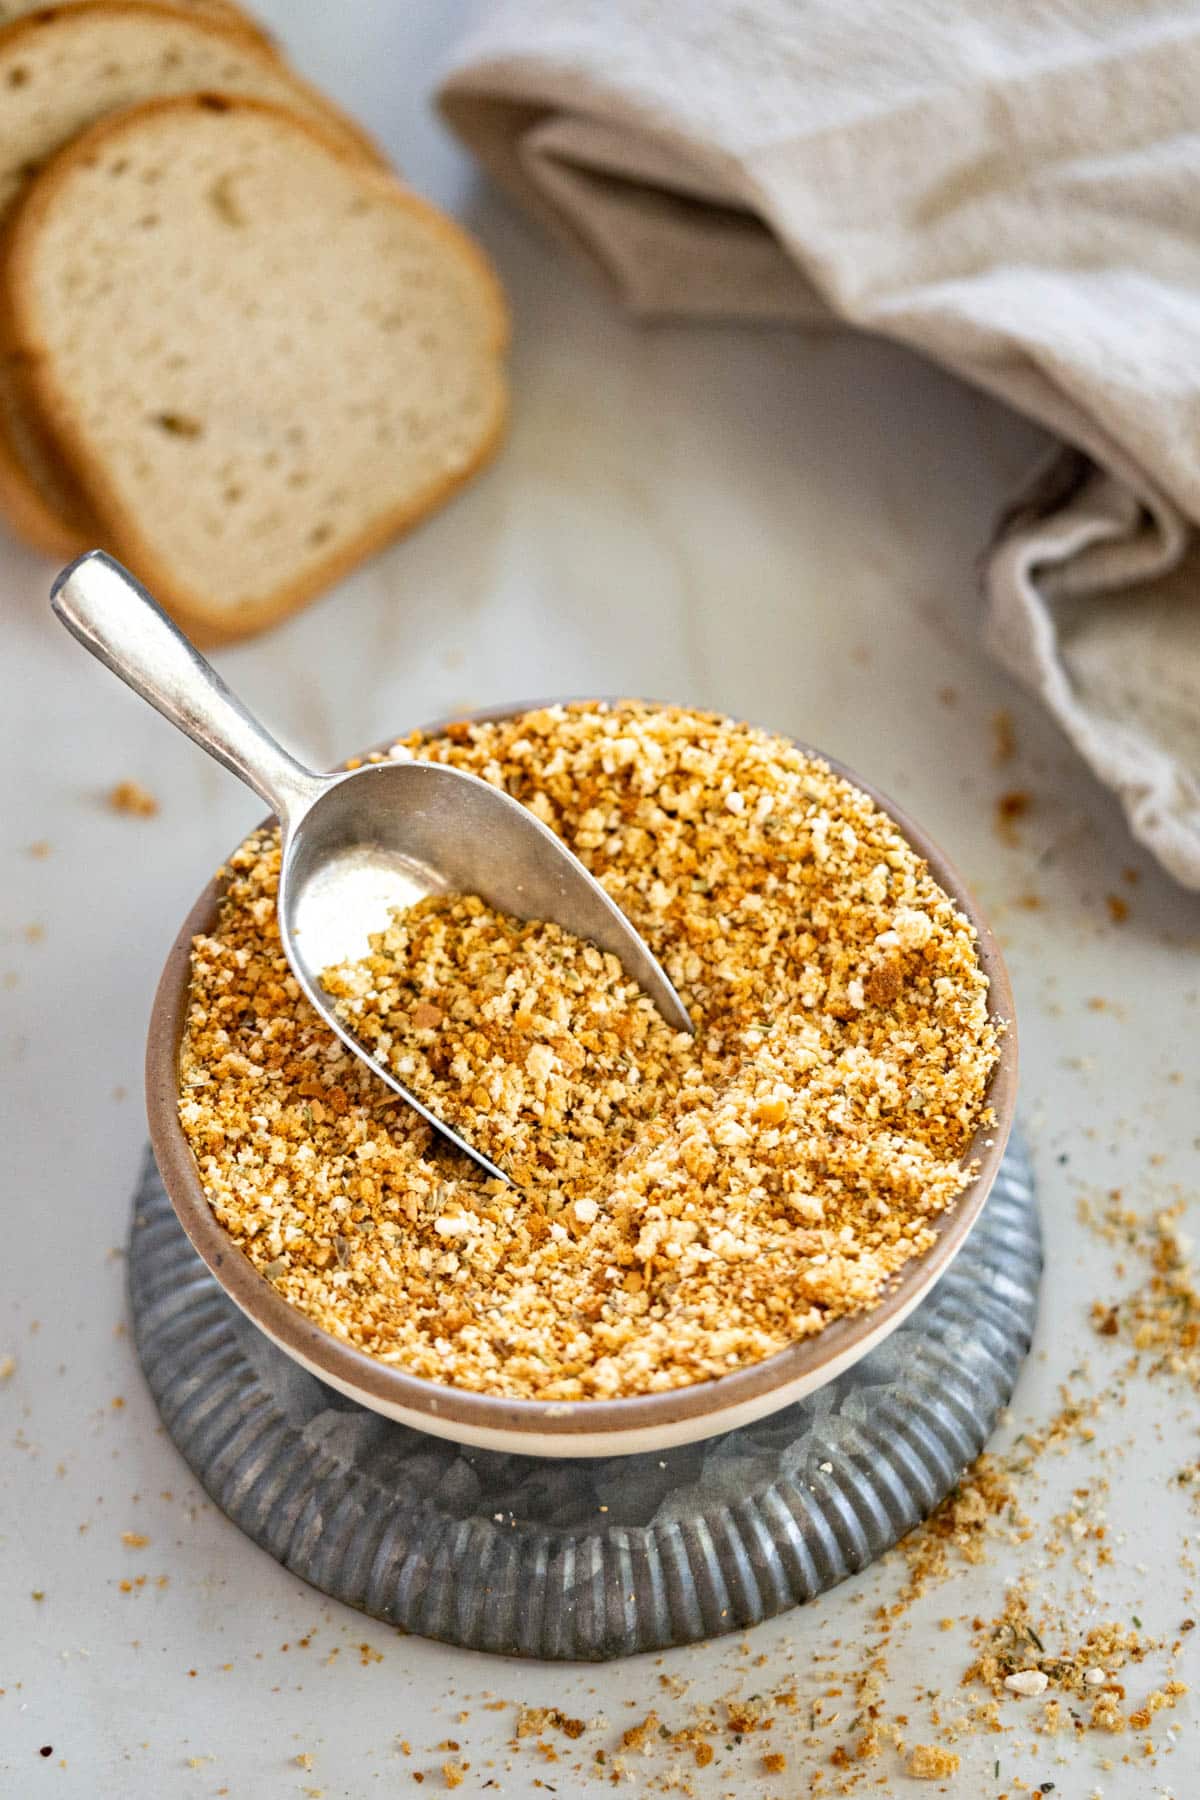 Gluten-free bread crumbs in a bowl with a loaf of GF bread in the back.